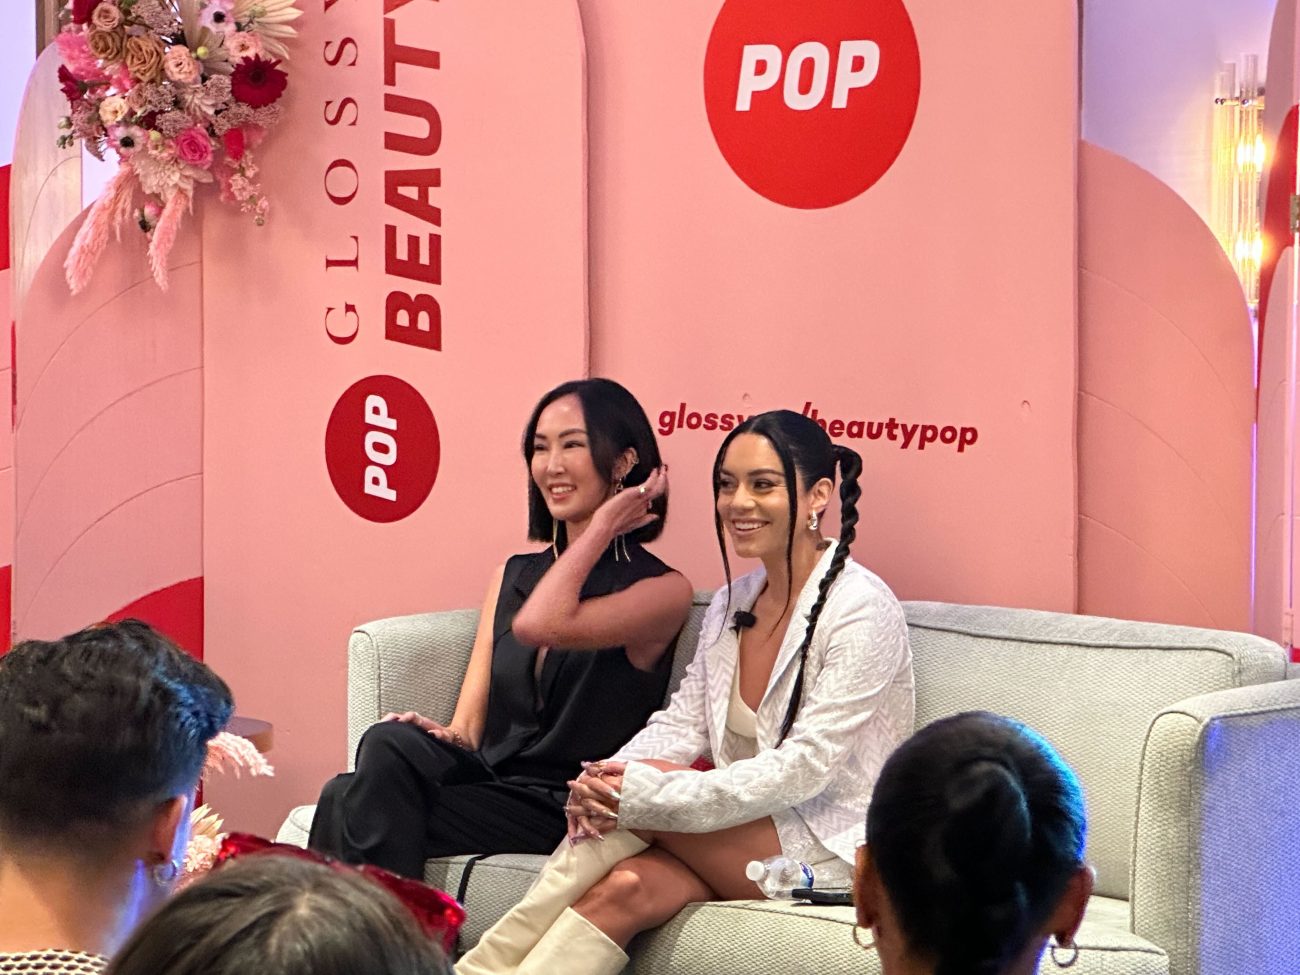 Glossy Beauty Pop: 10 learnings about the power of the influencer from the inaugural event